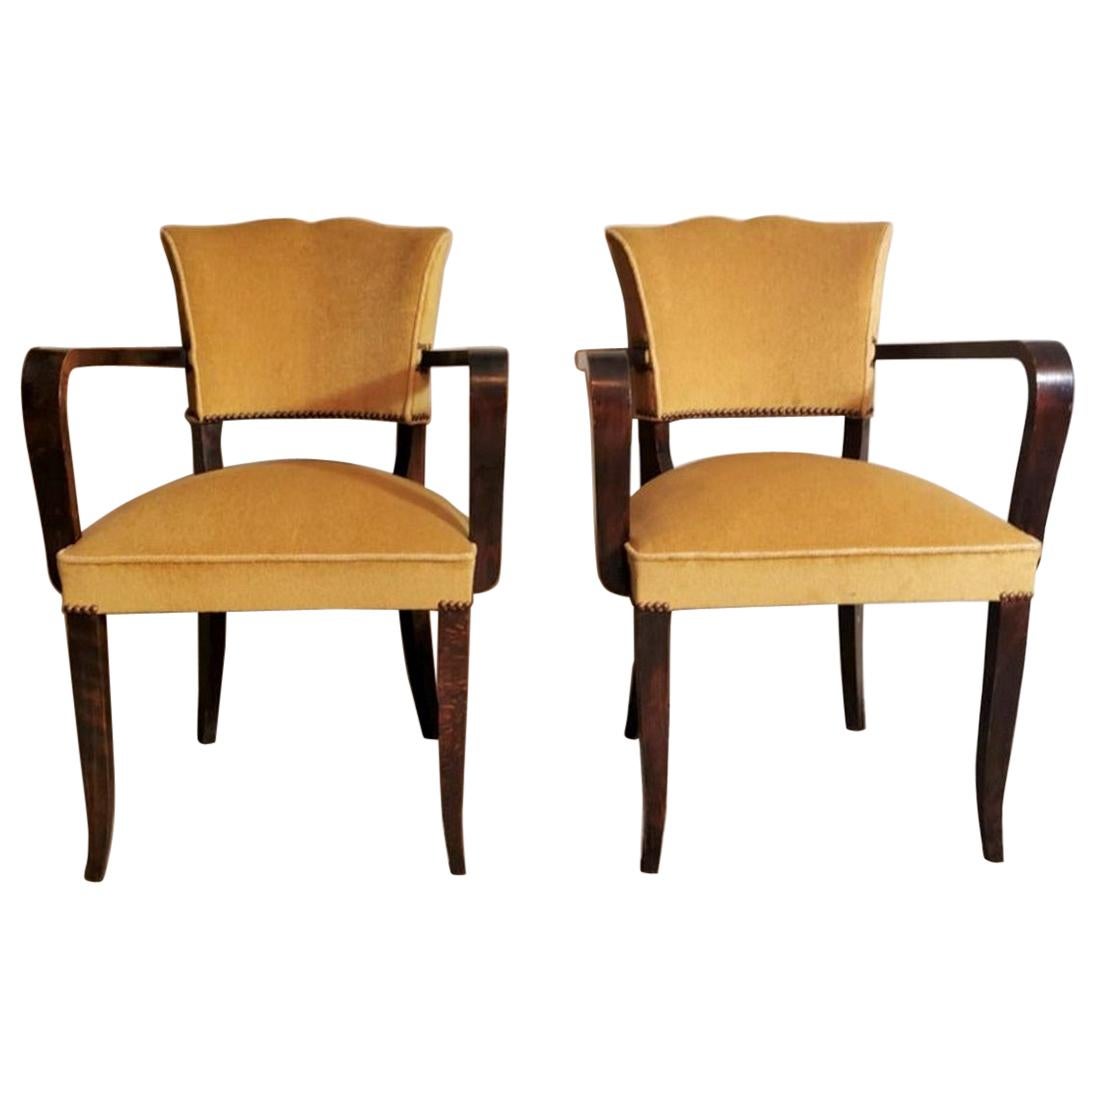 Art Deco Pair of French Chairs with Armrests